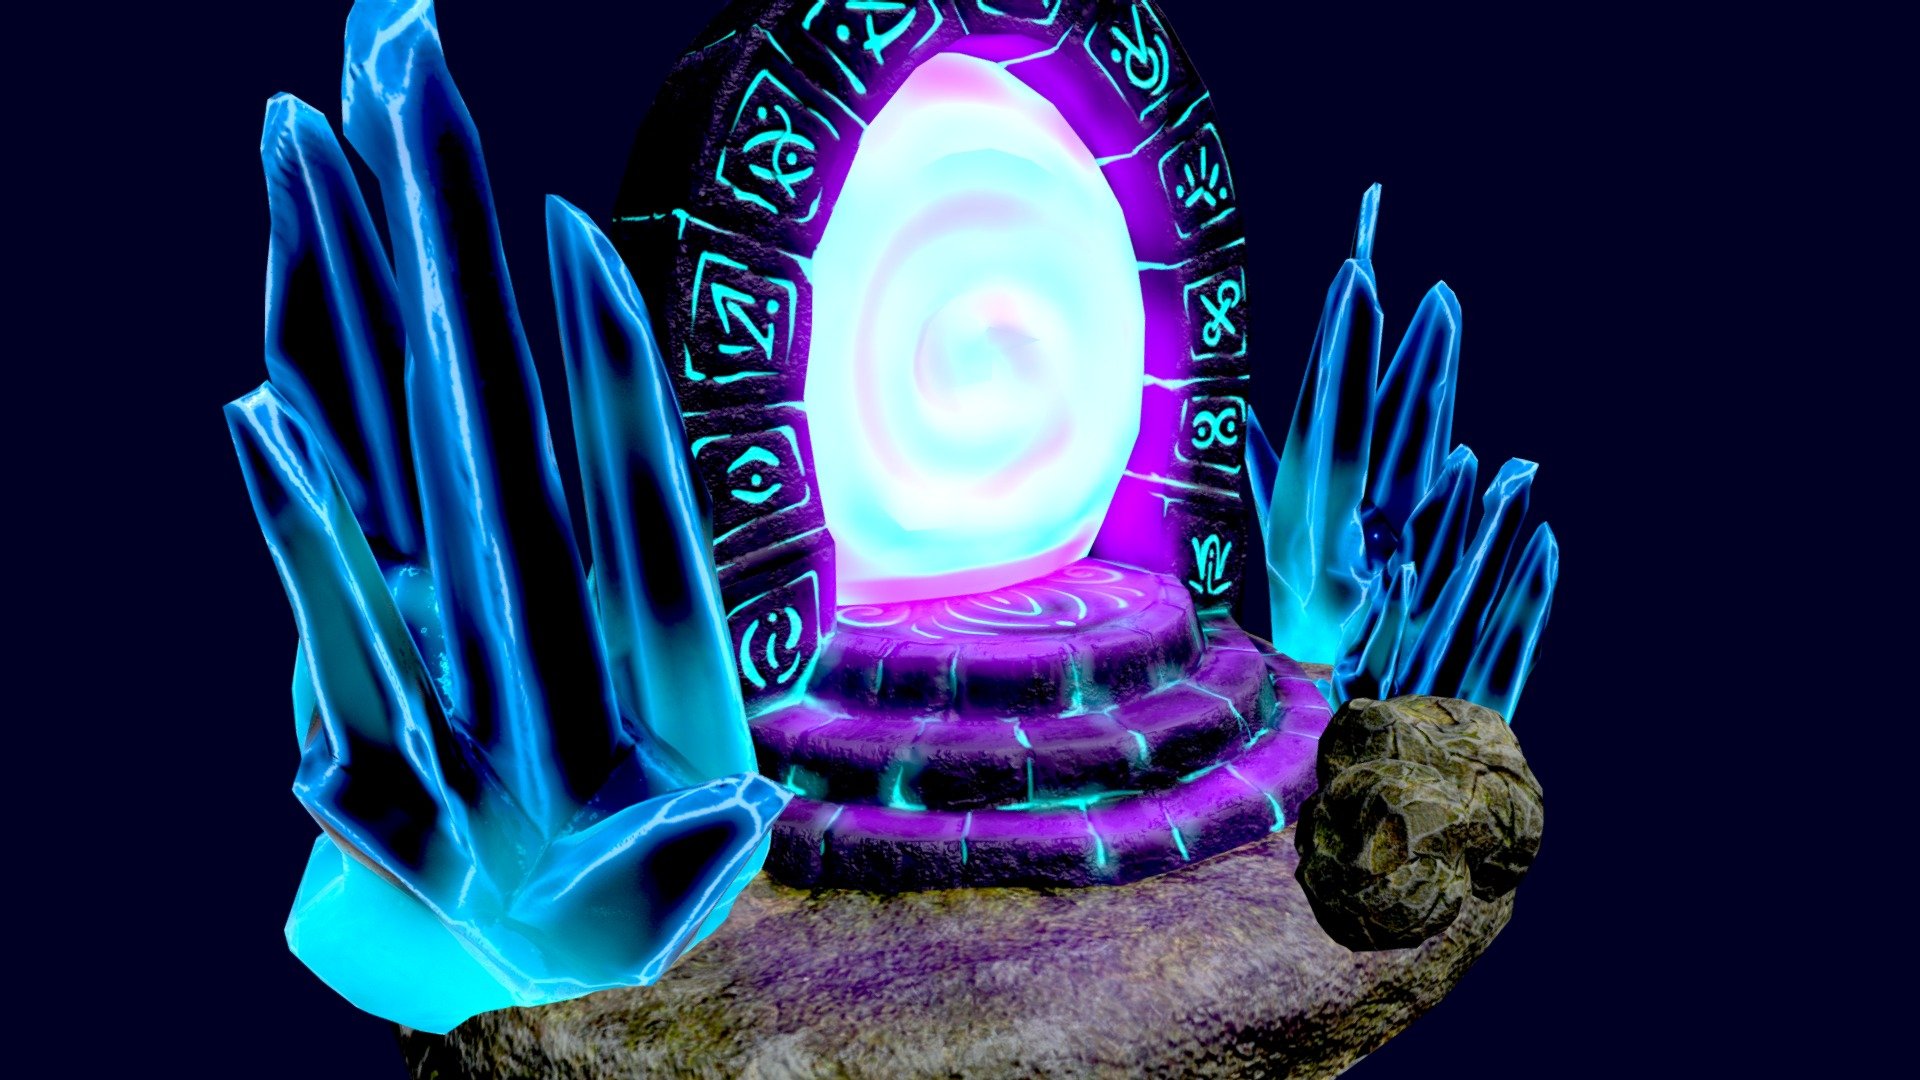 This model is one of the elements of the project “The Cave of Eternity”. https://sketchfab.com/3d-models/the-cave-of-eternity-db7952f26213449ea35a7f6099b91005 - Portal (object №2) - Download Free 3D model by salinaforr 3d model